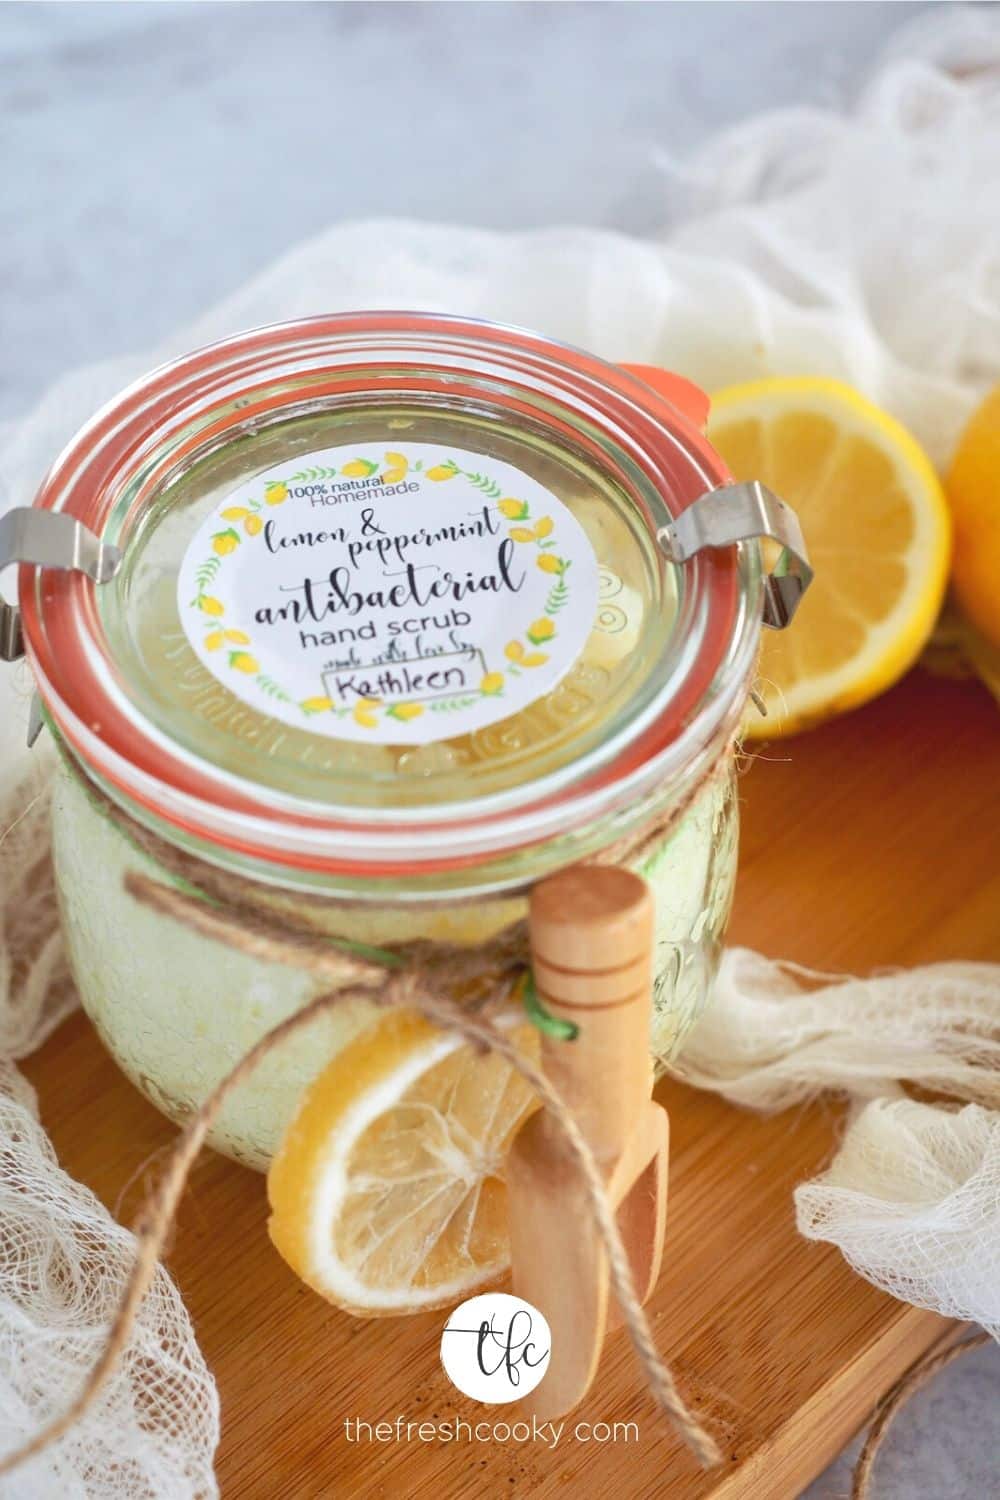 Top down shot of jar of lemon peppermint antibacterial hand scrub with free label, tied with dried lemon and a wooden scoop.